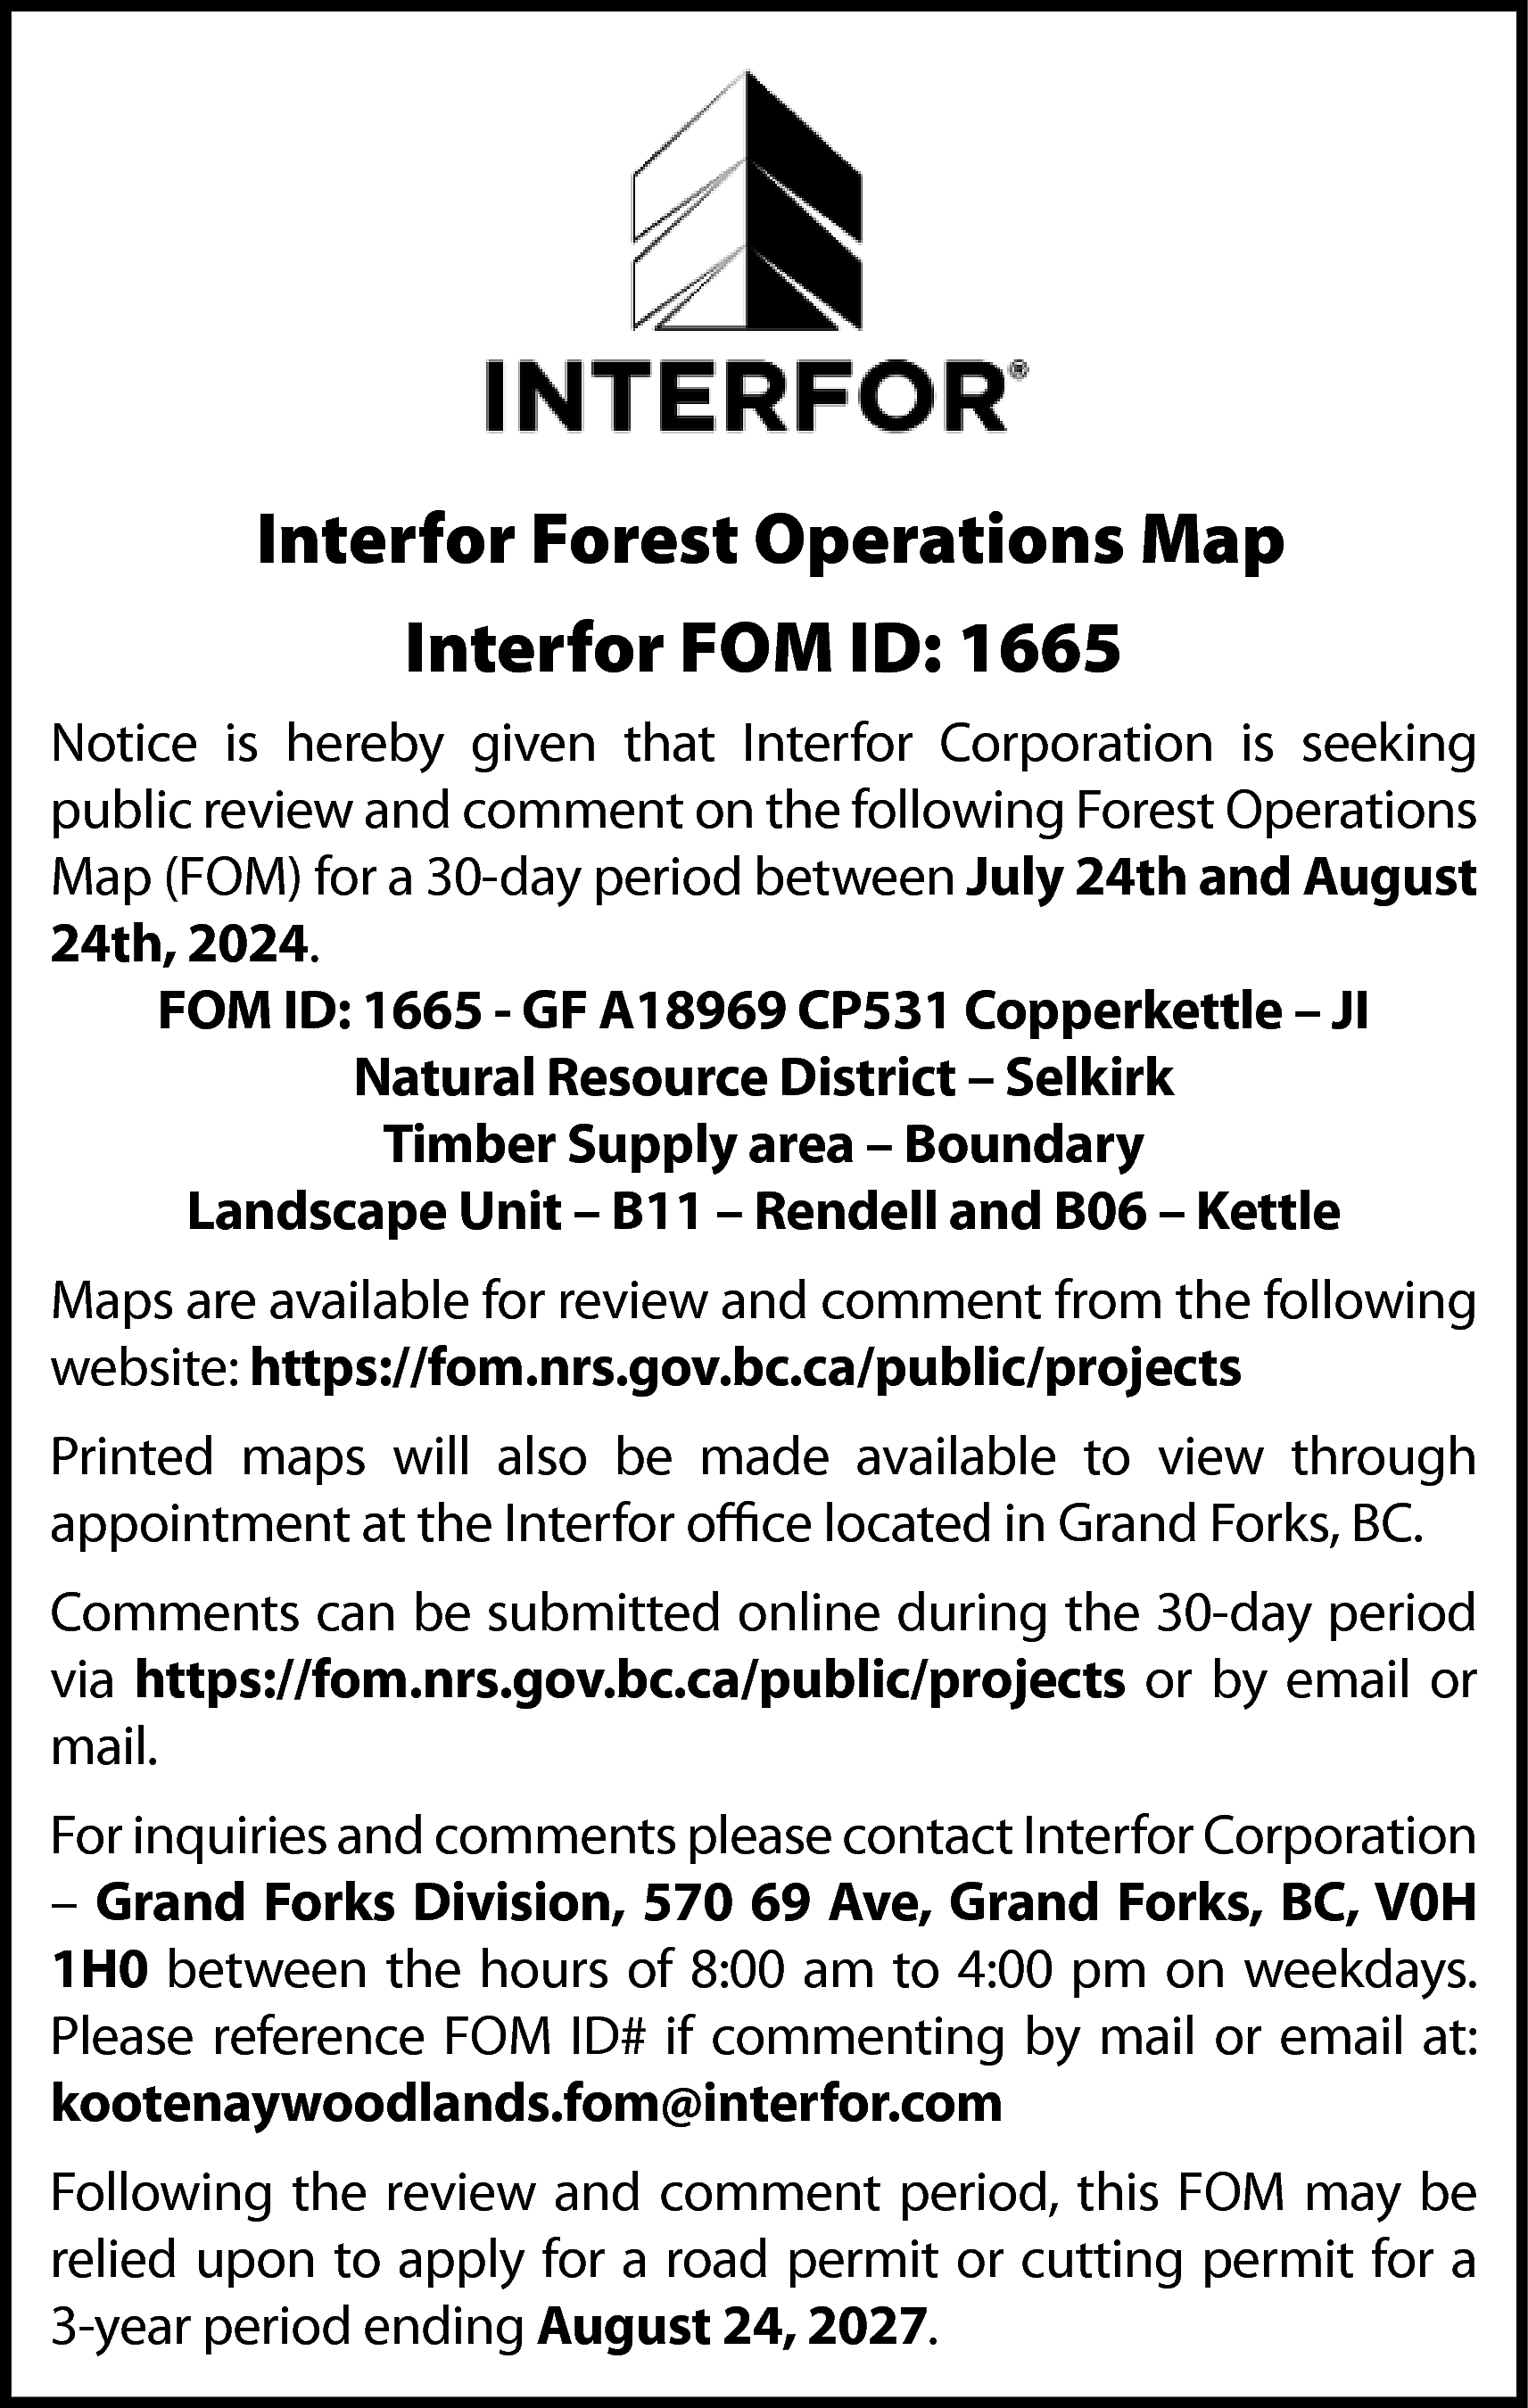 Interfor Forest Operations Map <br>Interfor  Interfor Forest Operations Map  Interfor FOM ID: 1665  Notice is hereby given that Interfor Corporation is seeking  public review and comment on the following Forest Operations  Map (FOM) for a 30-day period between July 24th and August  24th, 2024.  FOM ID: 1665 - GF A18969 CP531 Copperkettle – JI  Natural Resource District – Selkirk  Timber Supply area – Boundary  Landscape Unit – B11 – Rendell and B06 – Kettle  Maps are available for review and comment from the following  website: https://fom.nrs.gov.bc.ca/public/projects  Printed maps will also be made available to view through  appointment at the Interfor office located in Grand Forks, BC.  Comments can be submitted online during the 30-day period  via https://fom.nrs.gov.bc.ca/public/projects or by email or  mail.  For inquiries and comments please contact Interfor Corporation  – Grand Forks Division, 570 69 Ave, Grand Forks, BC, V0H  1H0 between the hours of 8:00 am to 4:00 pm on weekdays.  Please reference FOM ID# if commenting by mail or email at:  kootenaywoodlands.fom@interfor.com  Following the review and comment period, this FOM may be  relied upon to apply for a road permit or cutting permit for a  3-year period ending August 24, 2027.    